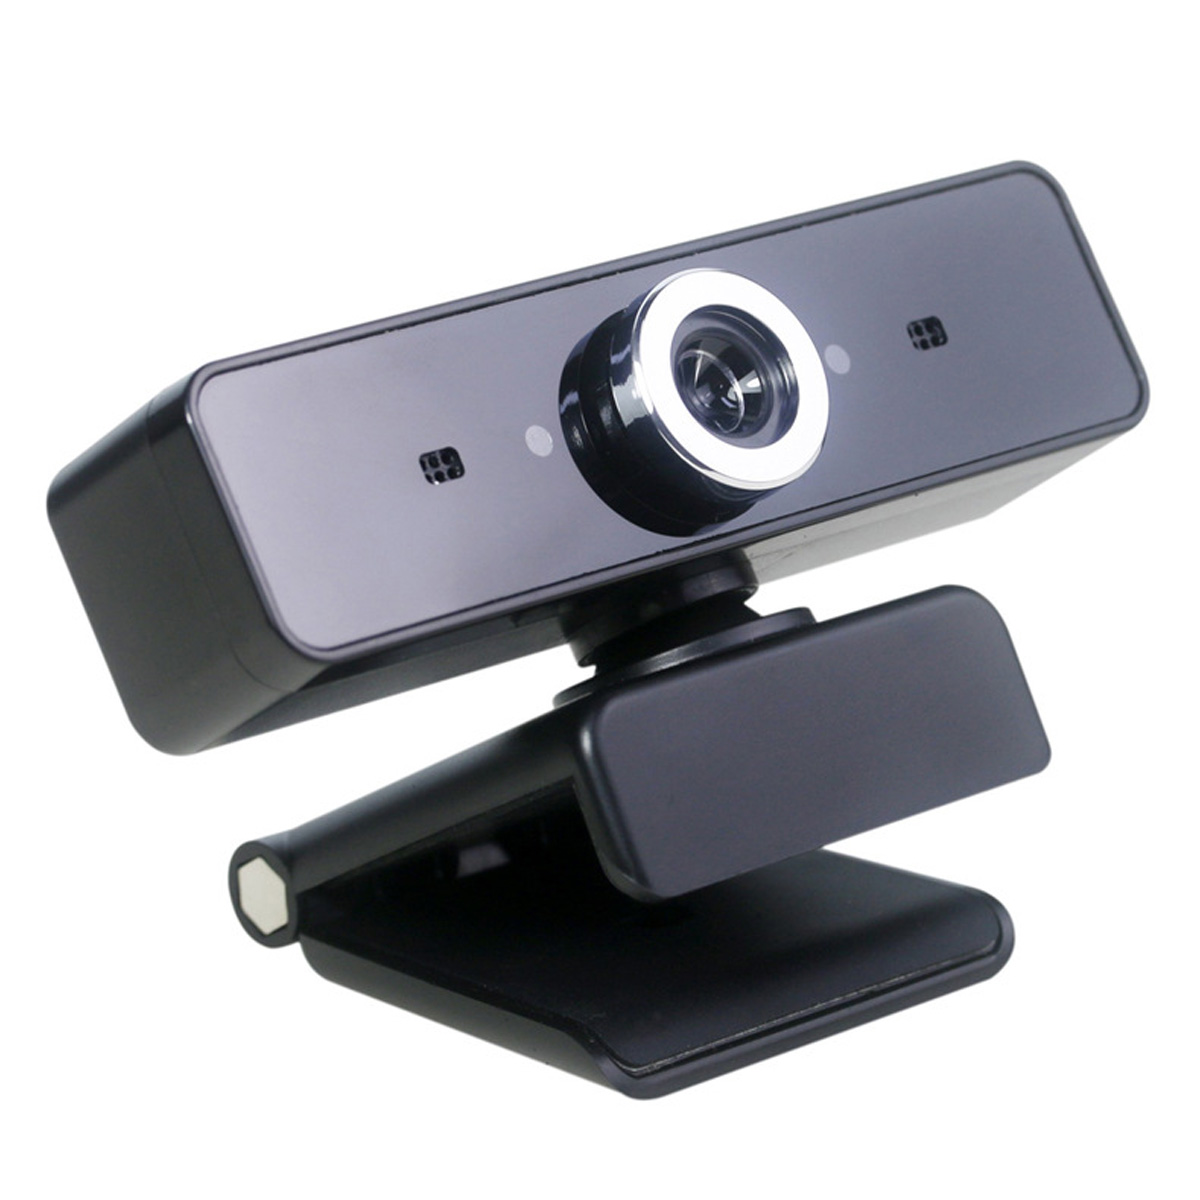 Avanc-HD-720P-USB-Webcam-with-Microphone-for-PC-Laptop-1681643-8